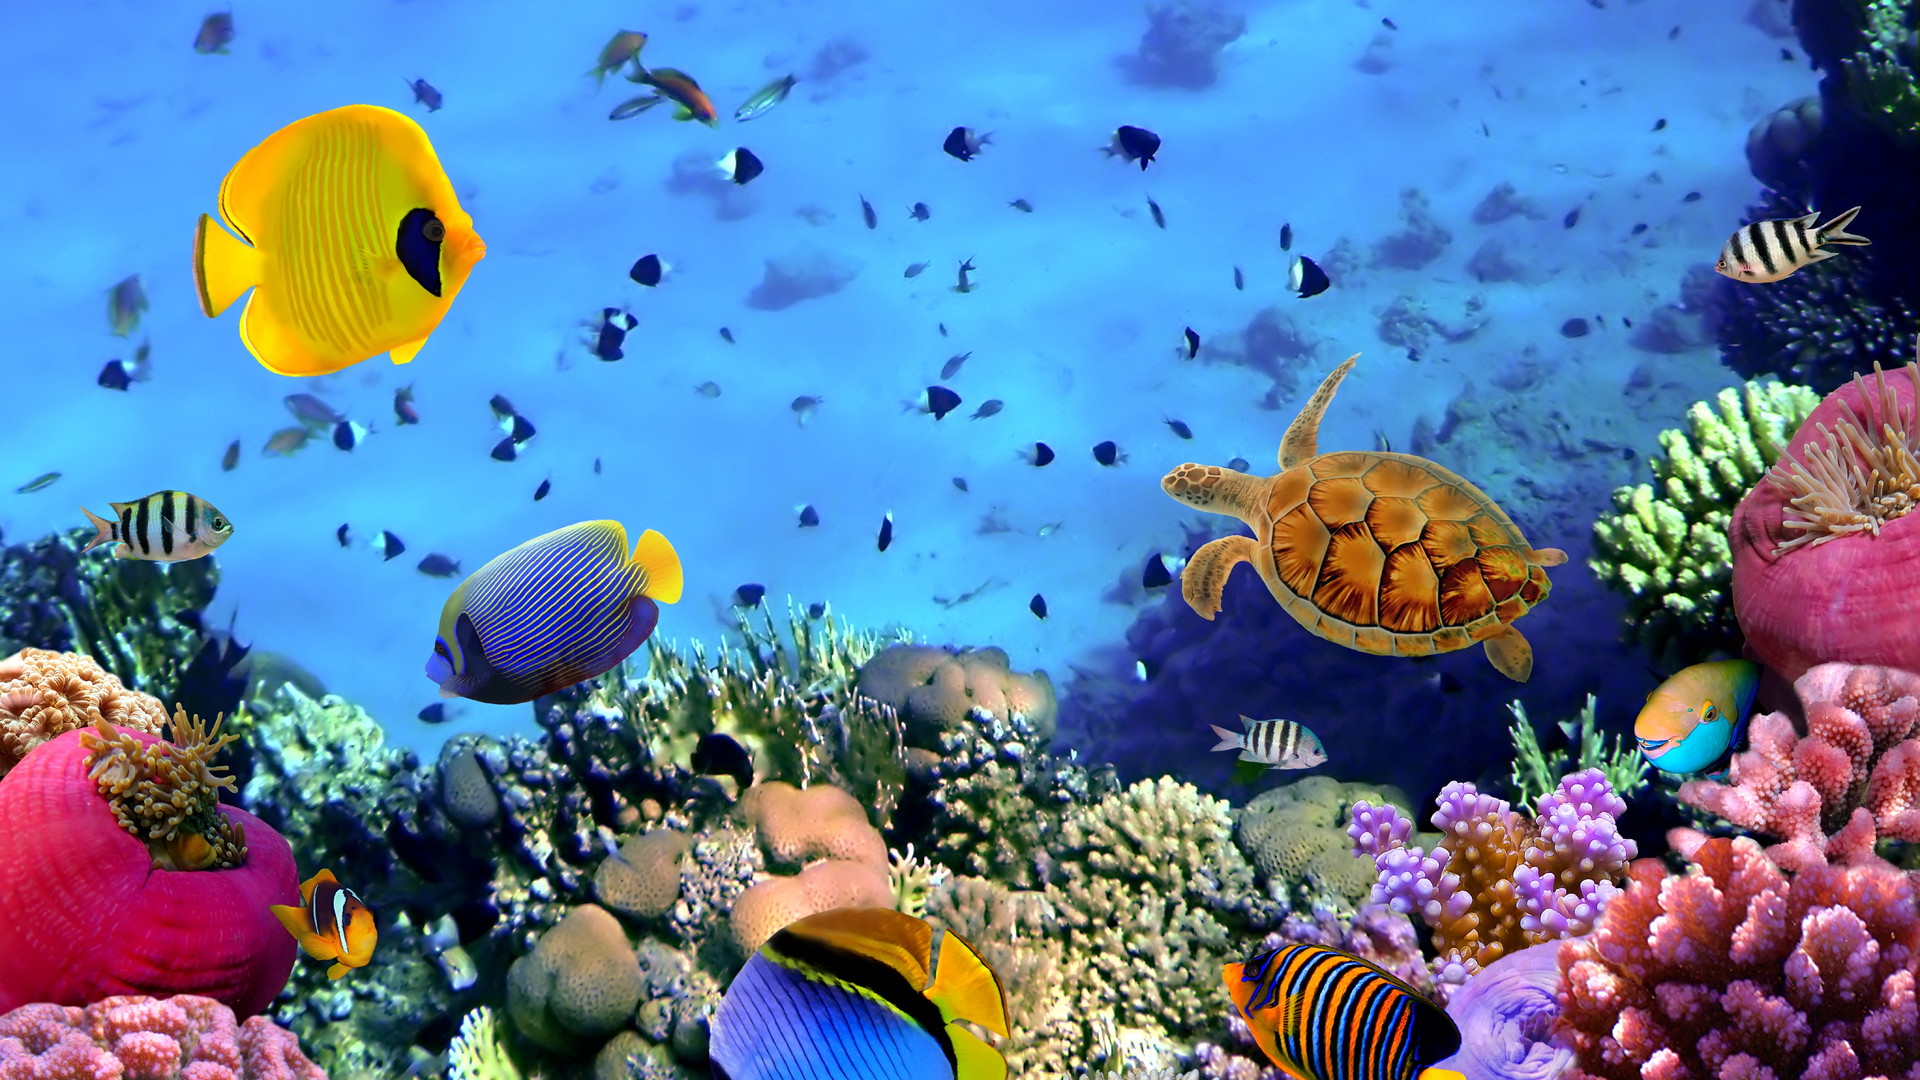 1920x1080 Coral Reef Wallpaper Hd | HD Wallpapers | Pinterest | Coral reefs and  Wallpaper